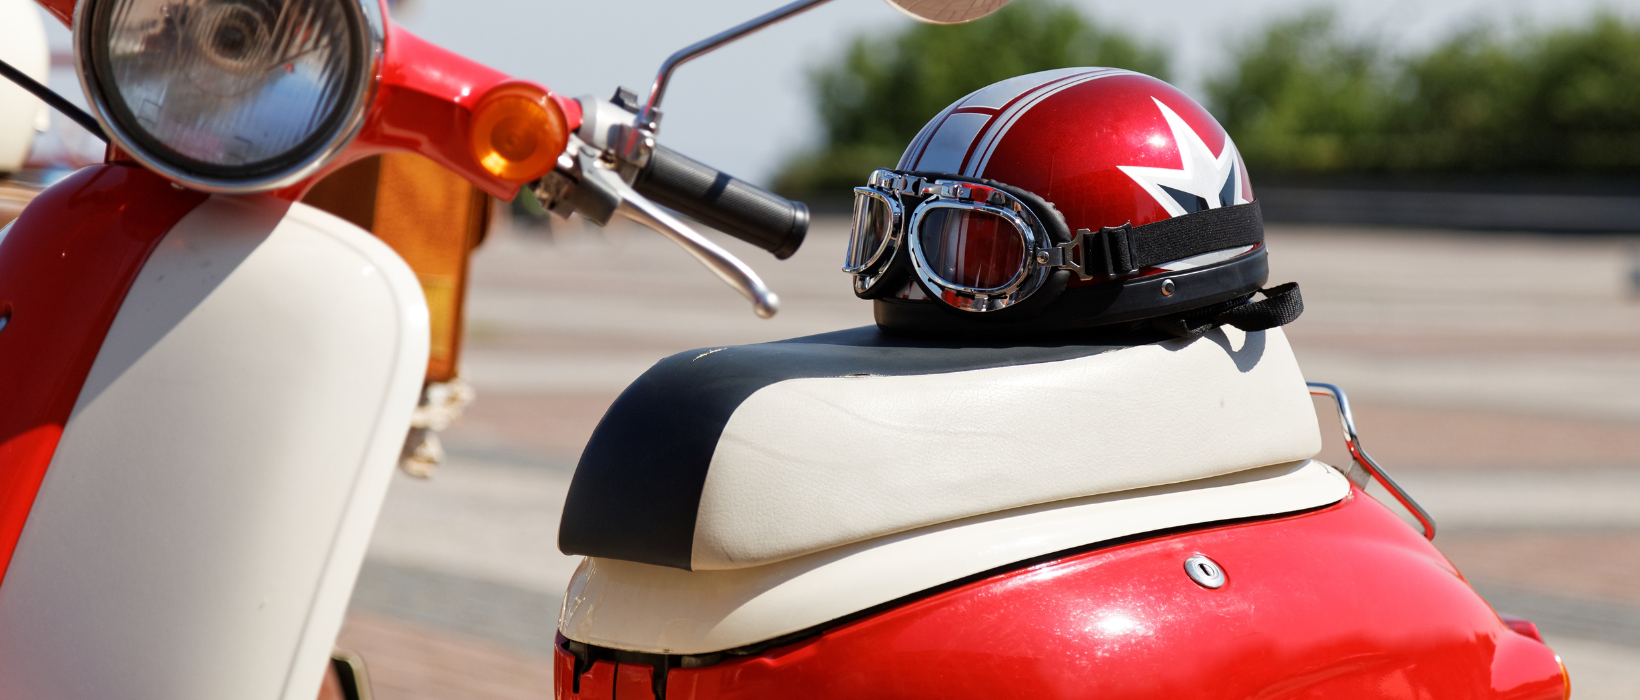 Closeup of red and white moped with helmet on the seat